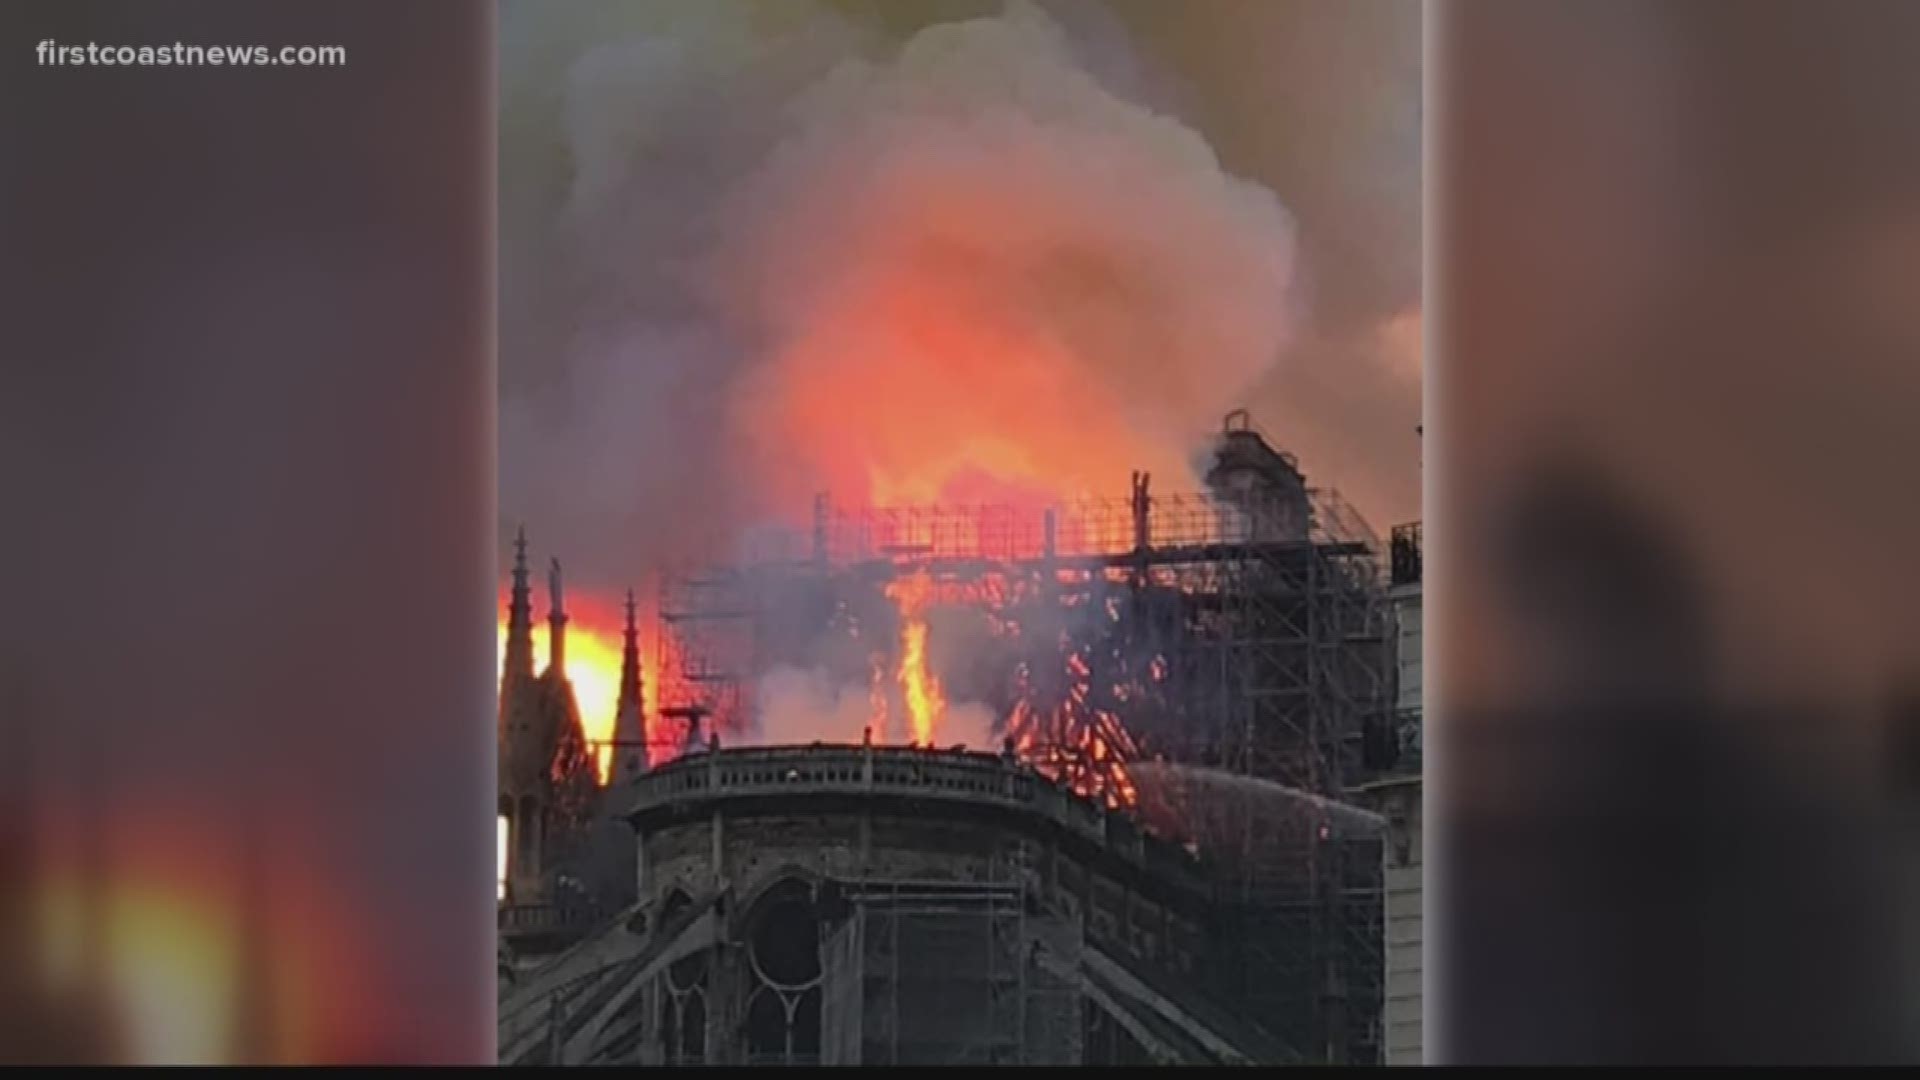 Brycen Gagnon, from Yulee, was visiting Paris when he captured video of the spire collapsing in the blaze.